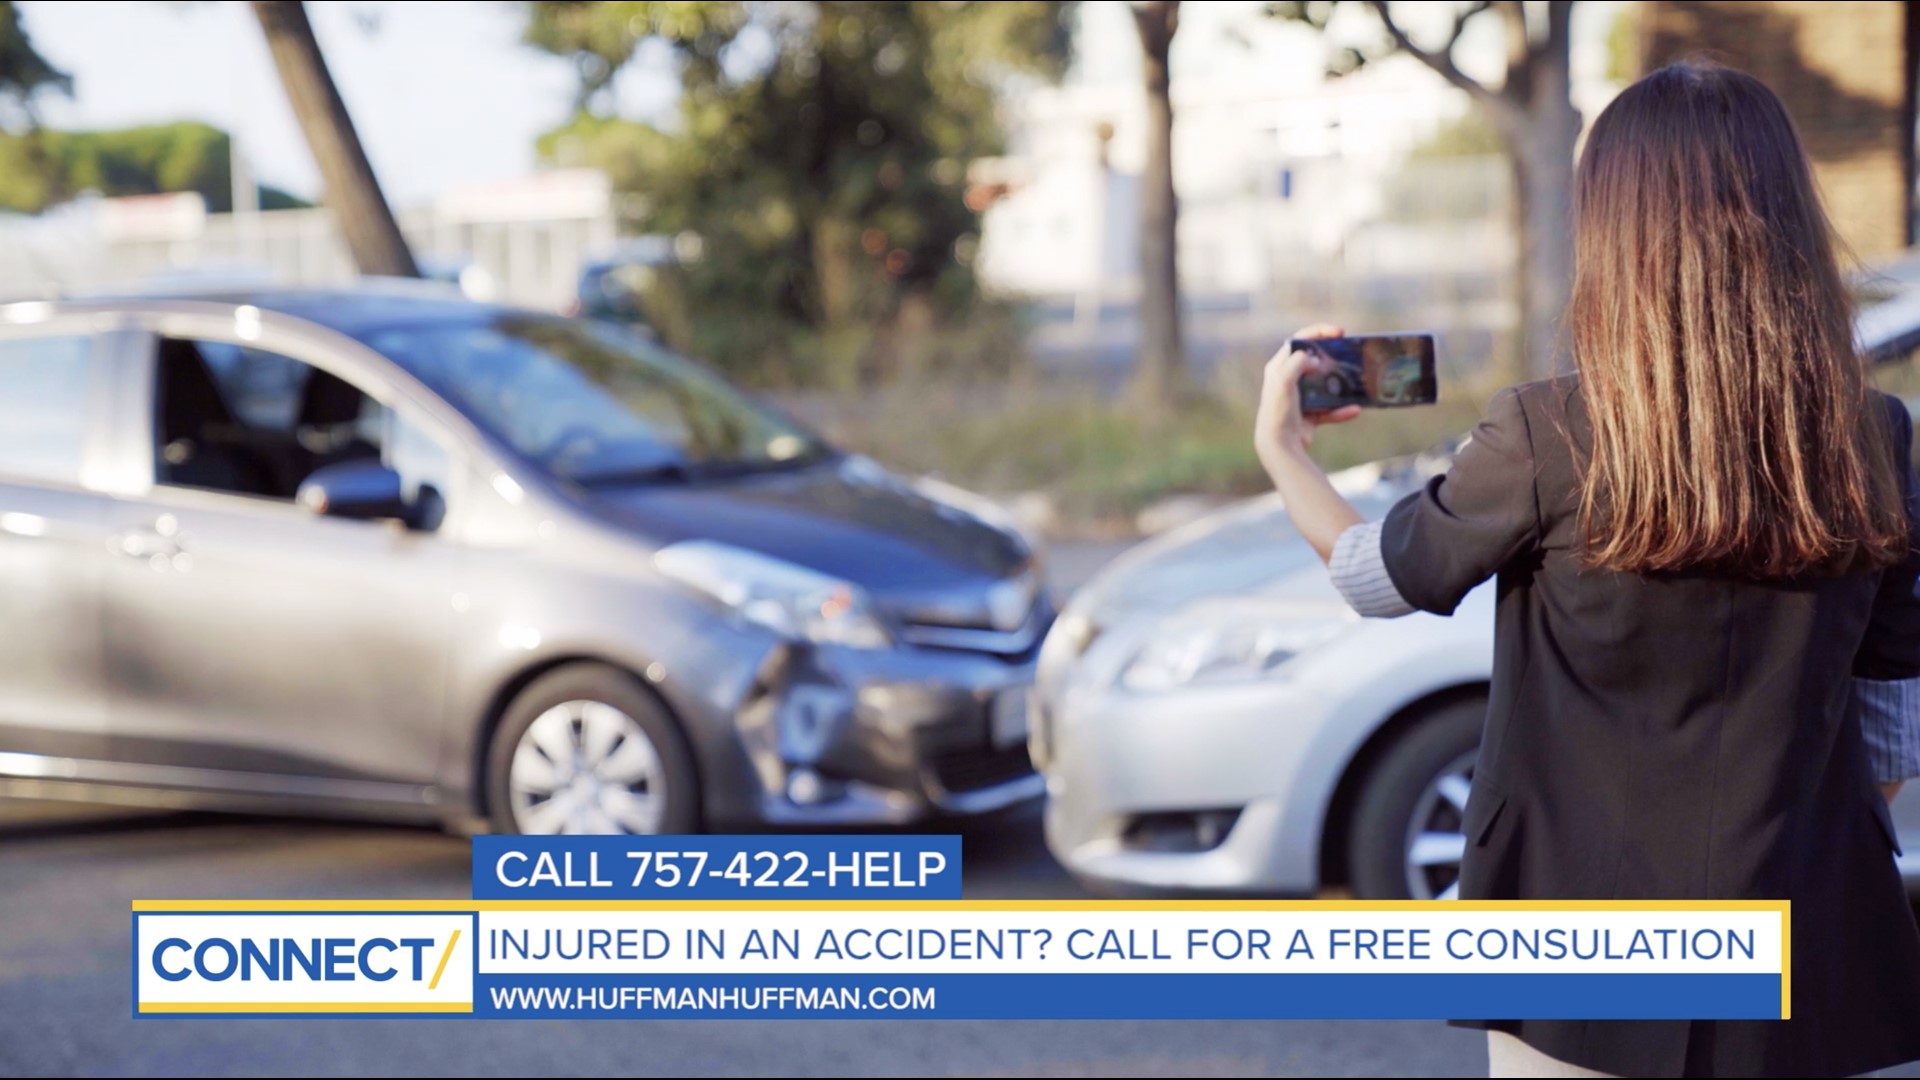 An attorney can work with the other person's insurance company to make sure you're fairly compensated after being in a car accident.